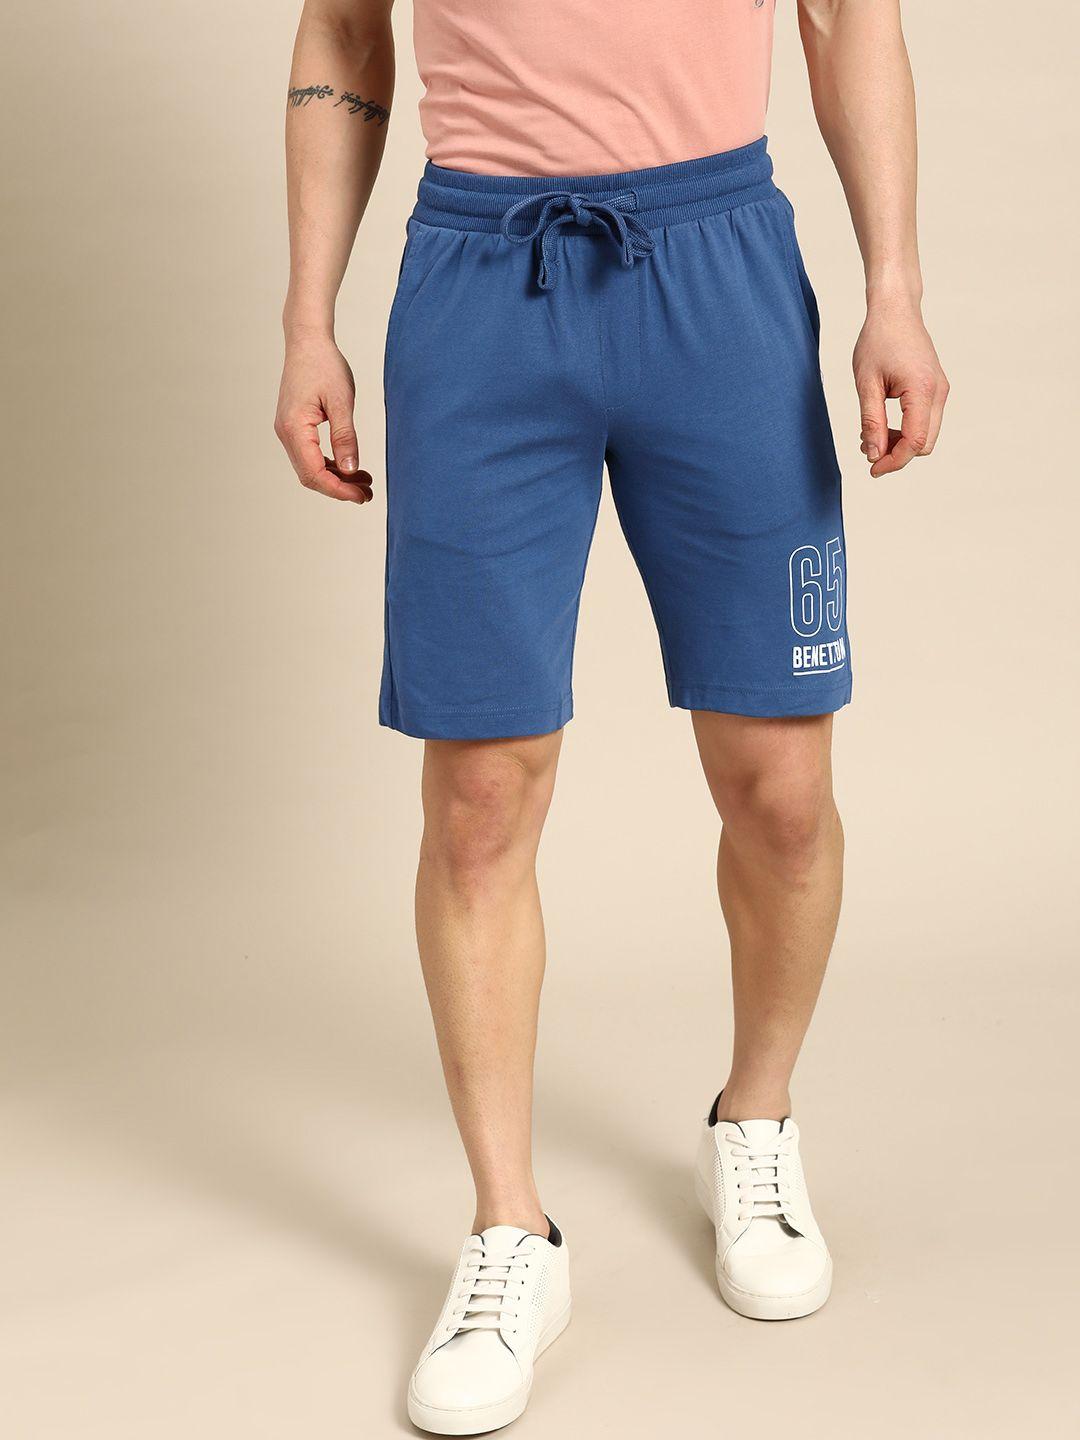 united-colors-of-benetton-men-typography-printed-pure-cotton-shorts